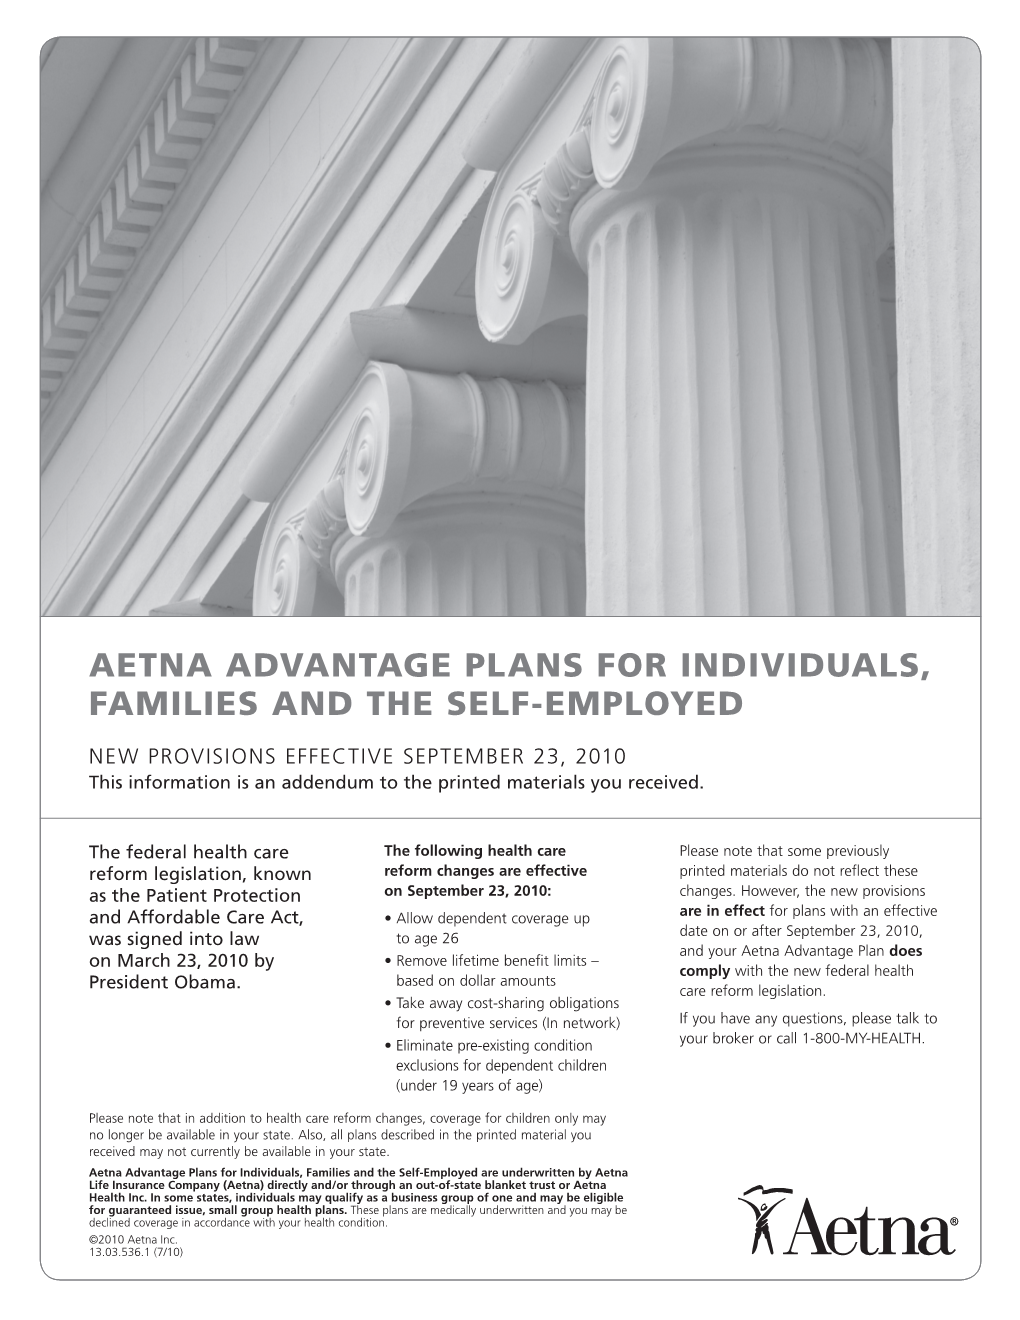 Aetna Advantage Plans for Individuals, Families and the Self-Employed